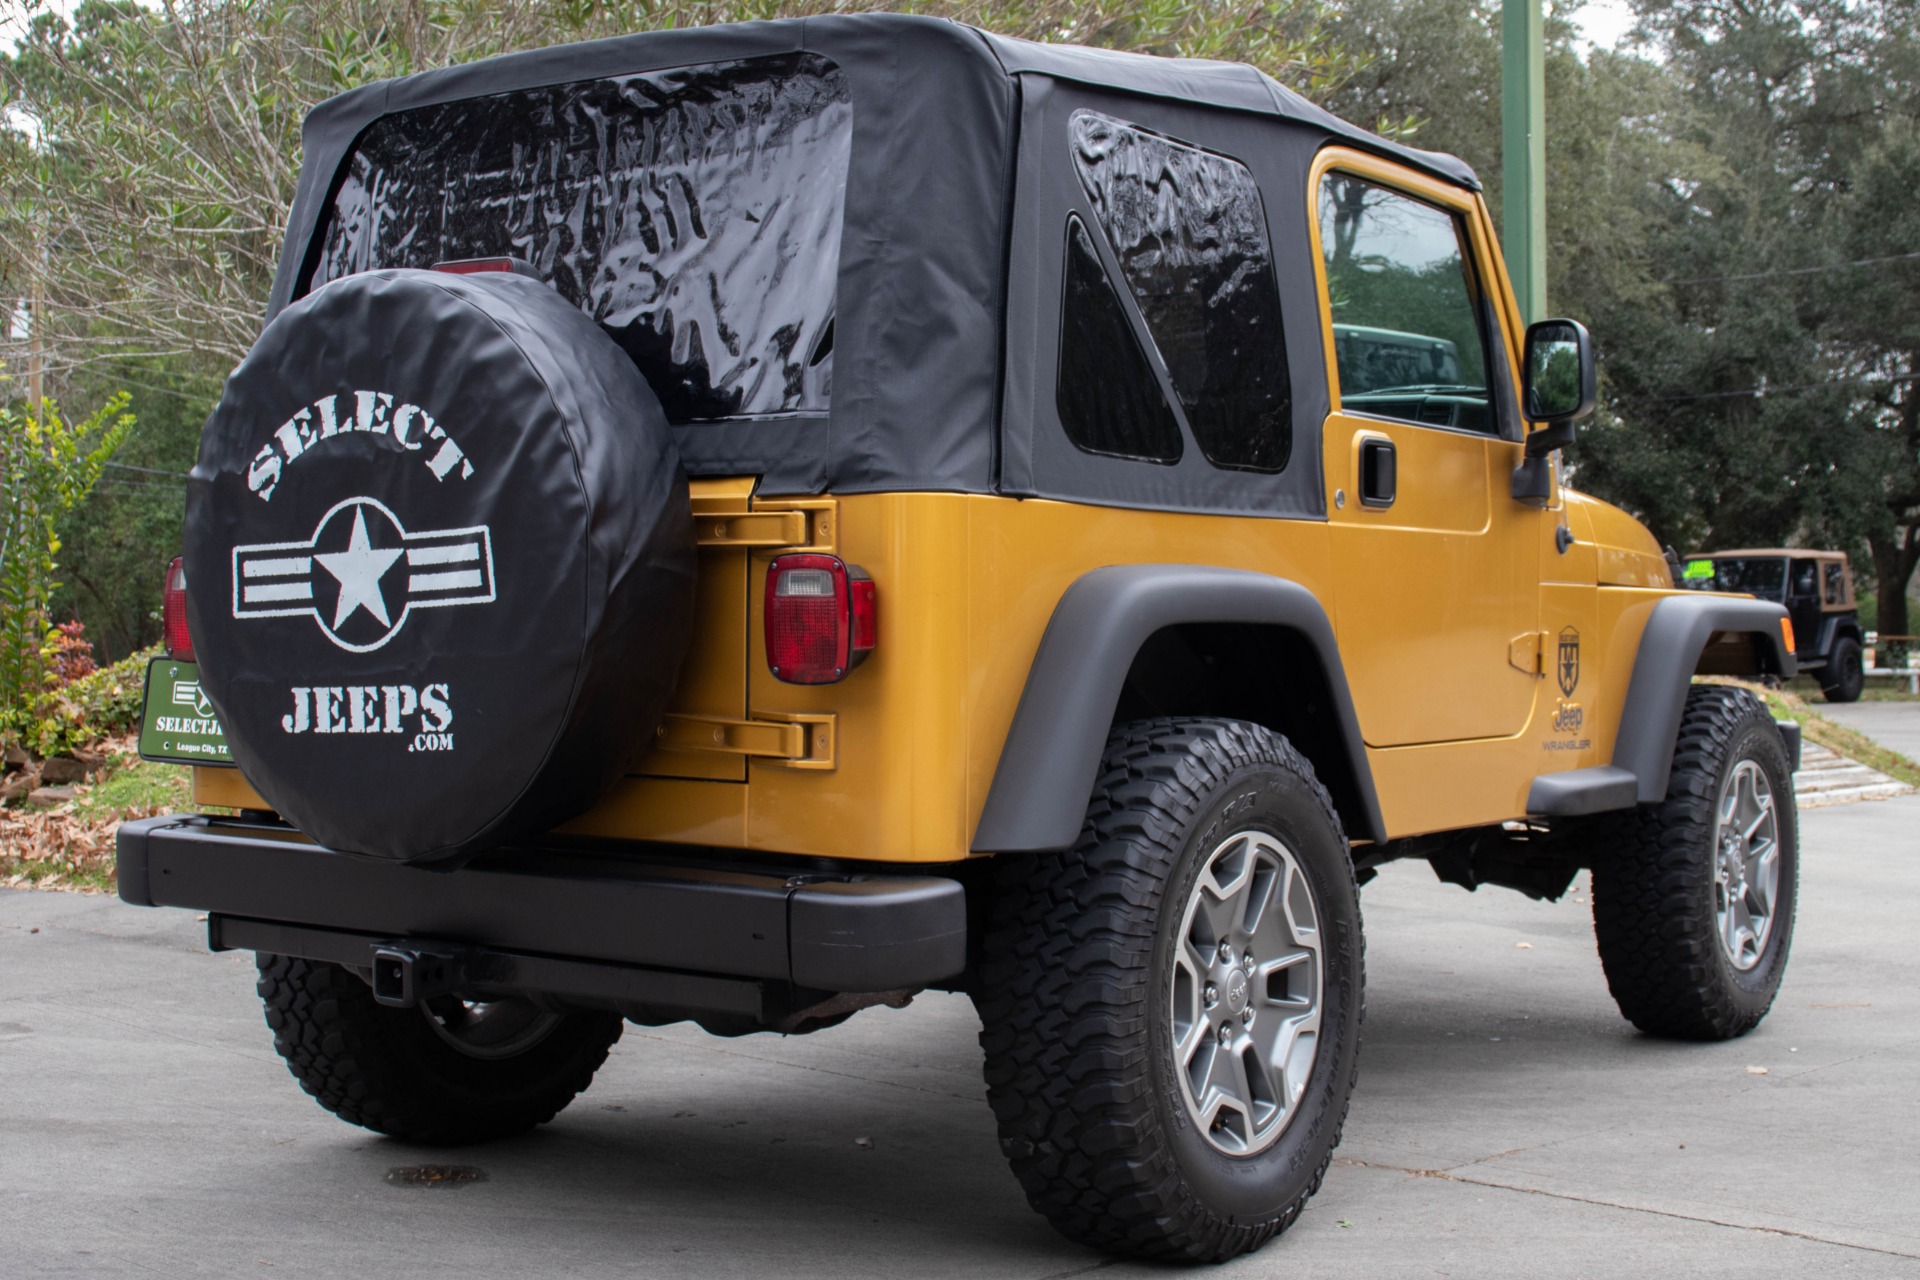 Used 2003 Jeep Wrangler X For Sale ($12,995) | Select Jeeps Inc. Stock  #325128